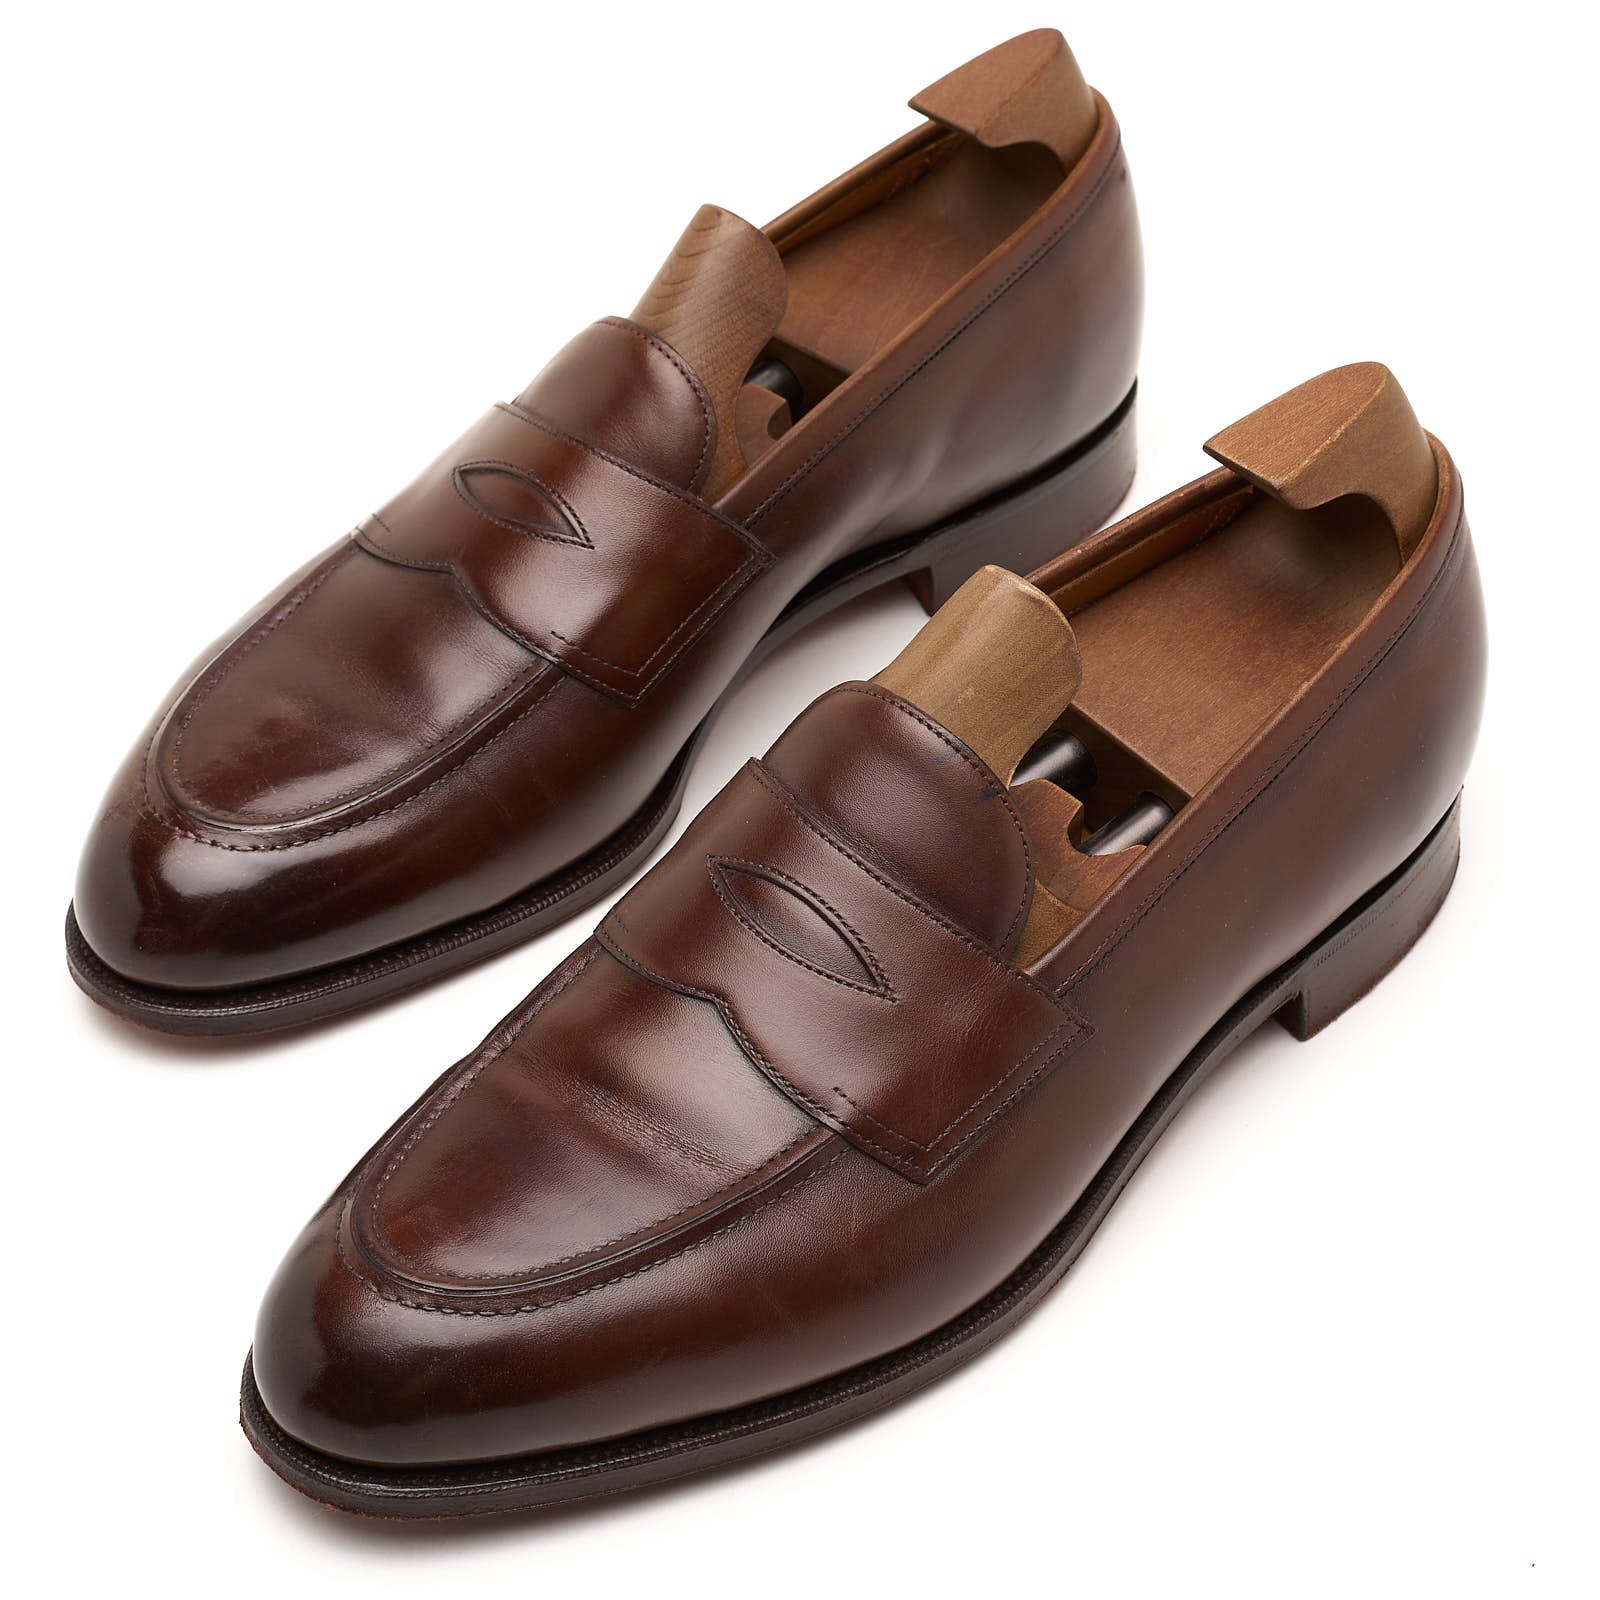 EDWARD GREEN Piccadilly Brown Calfskin Penny Loafer Shoes UK 8 US 8.5 E Last 184